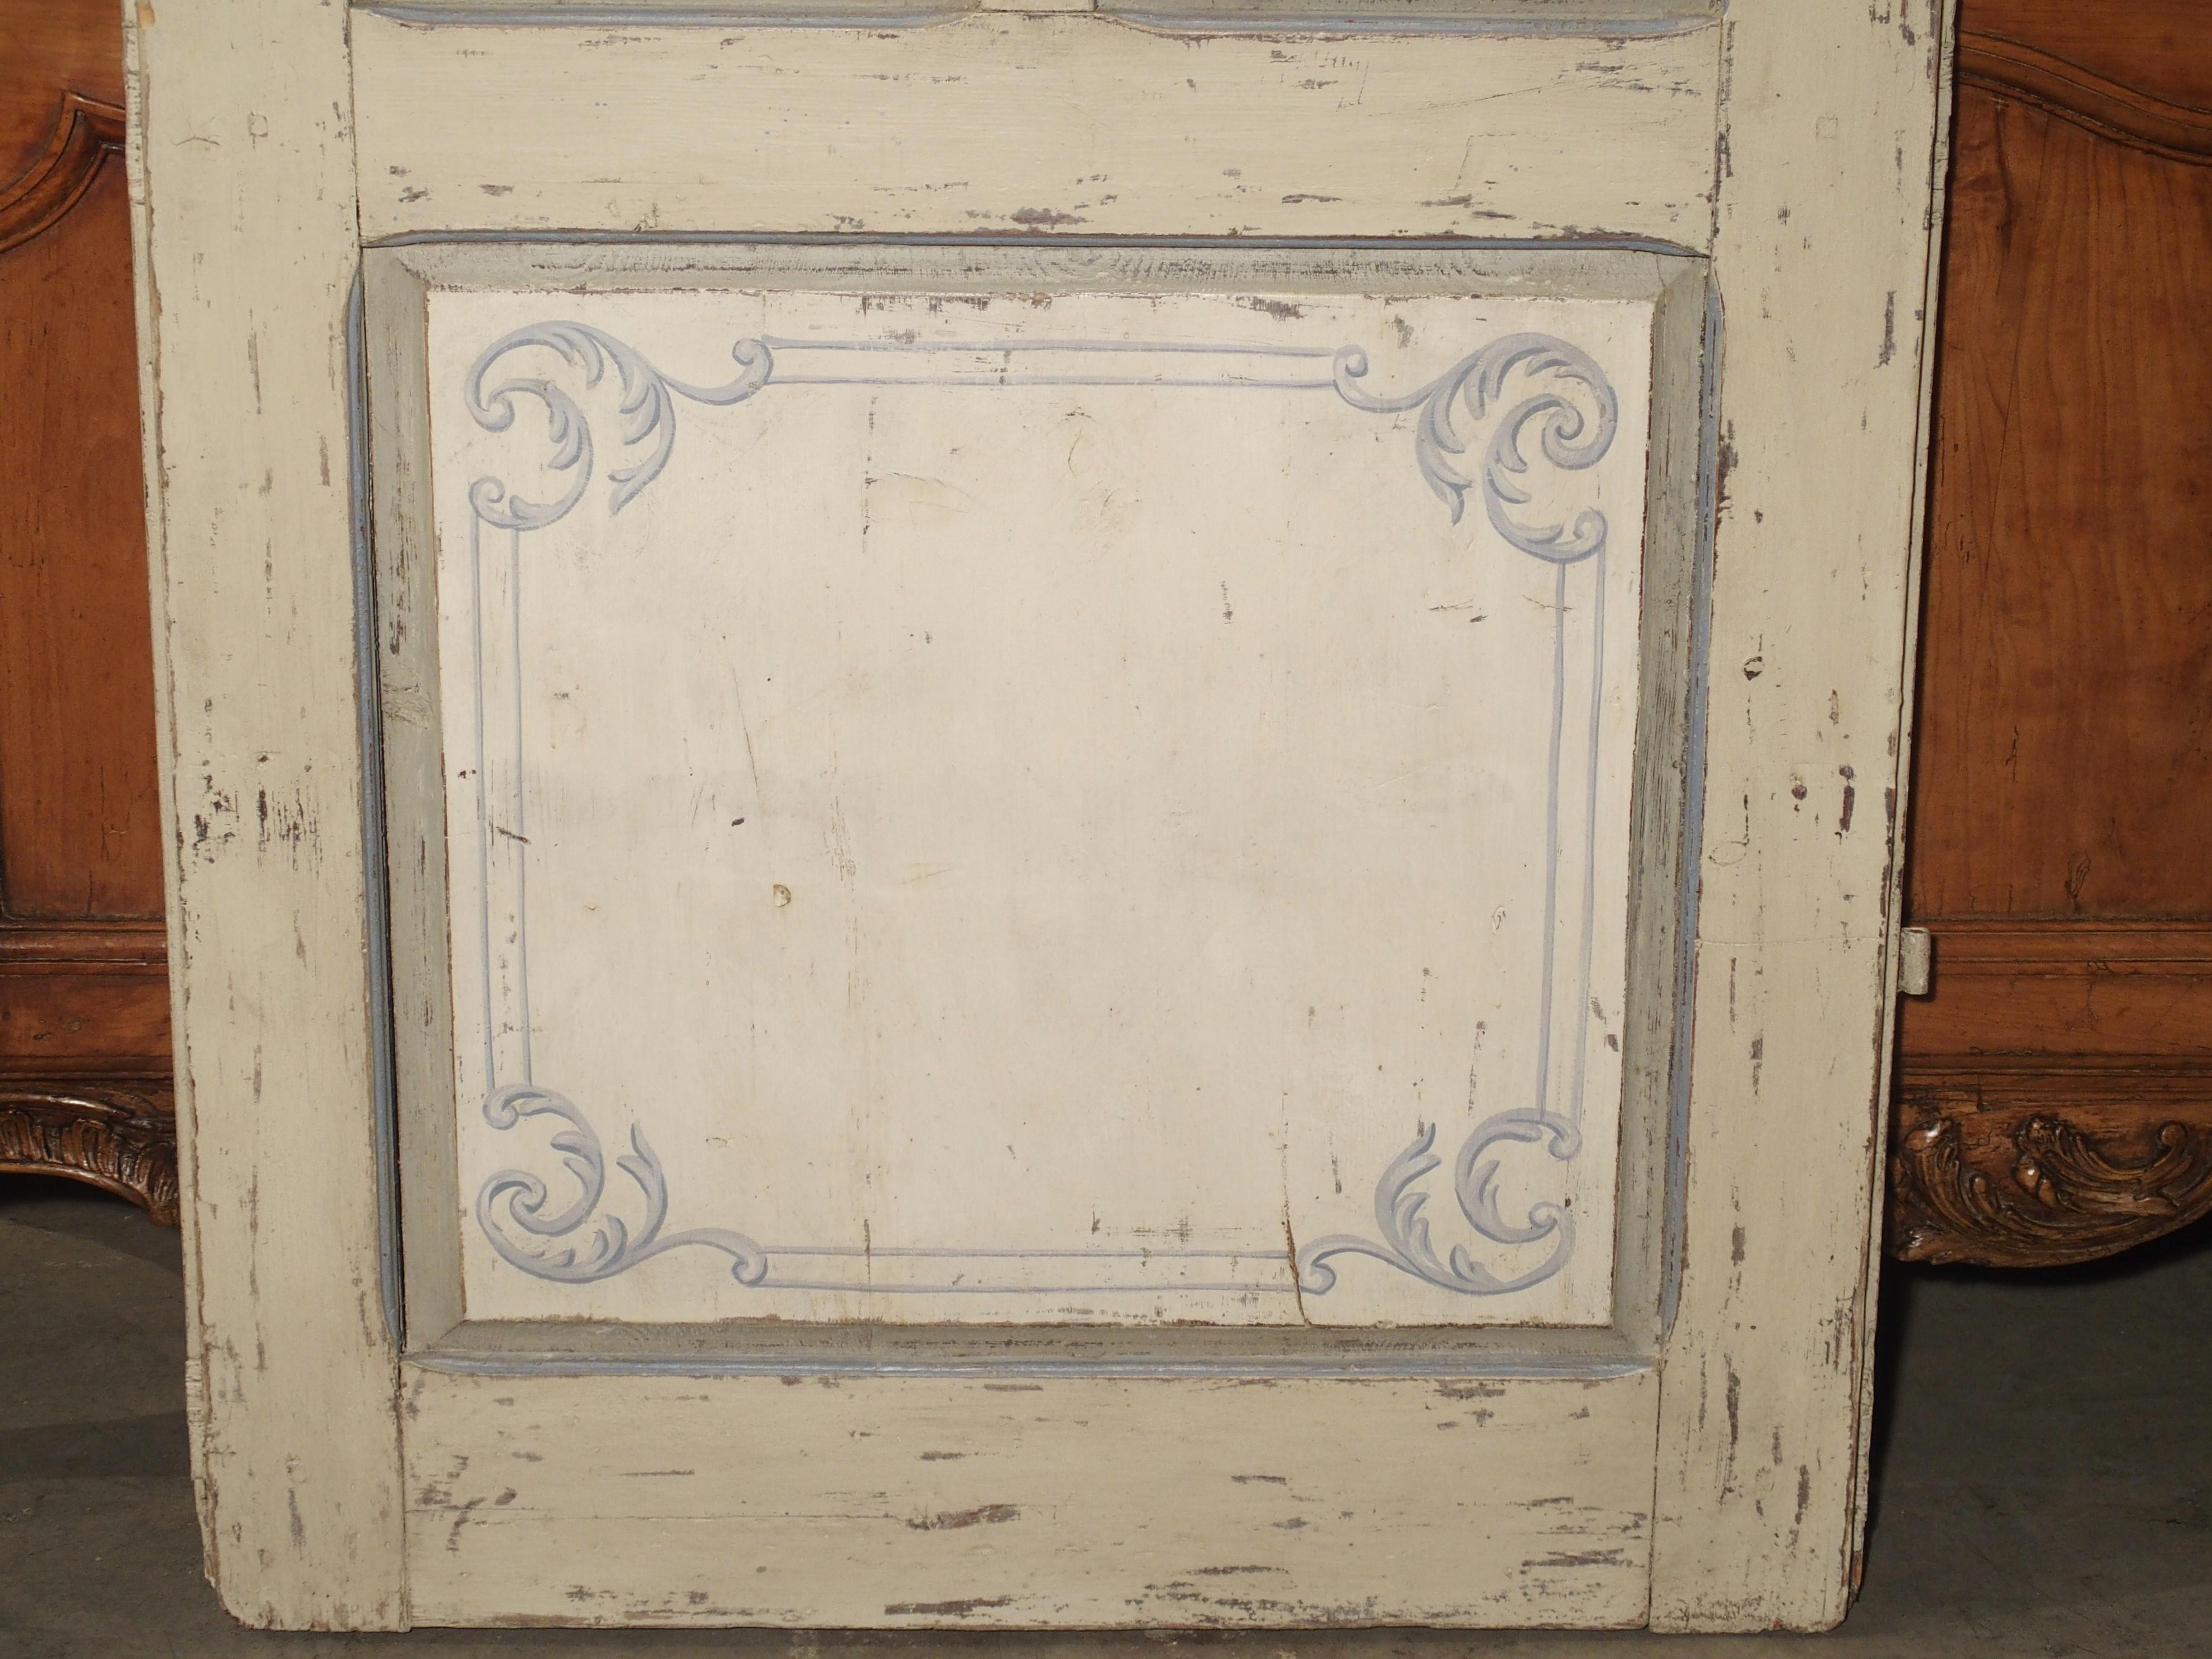 Italian Blue and White Painted Antique Door from Lombardy, Italy circa 1850